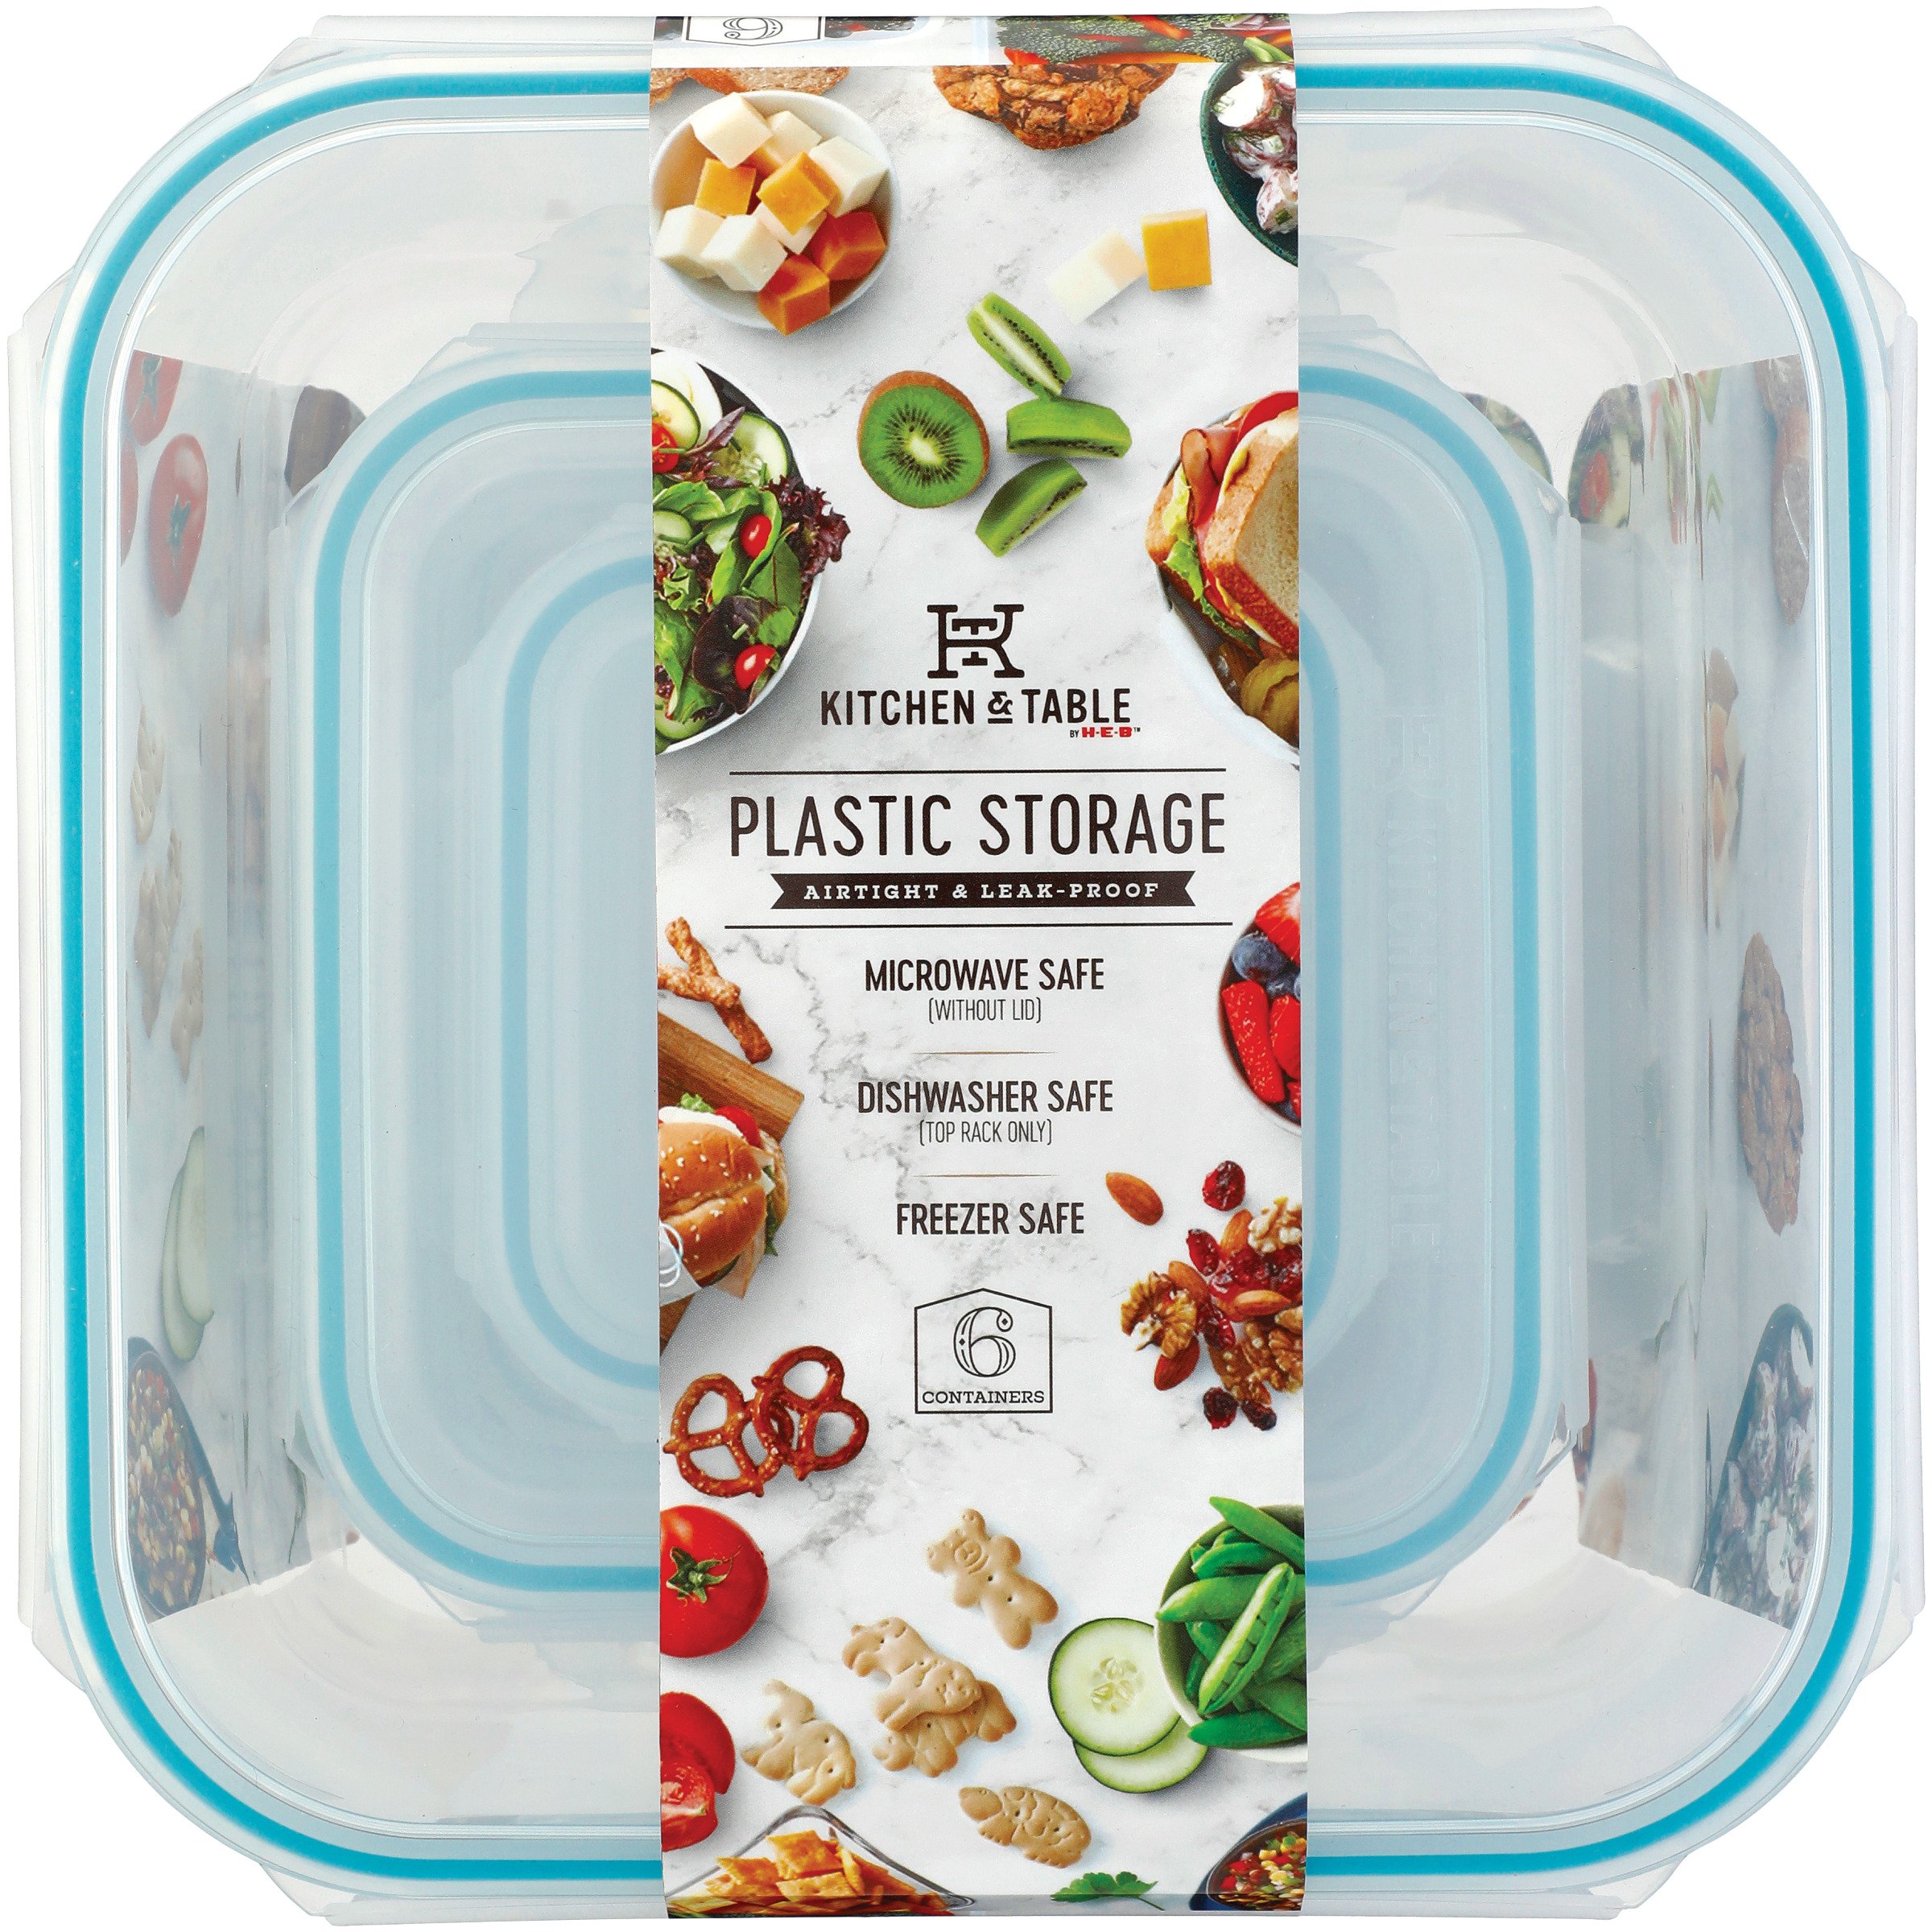 Ziploc Smart Snap Large Rectangle Containers and Lids - Shop Food Storage  at H-E-B